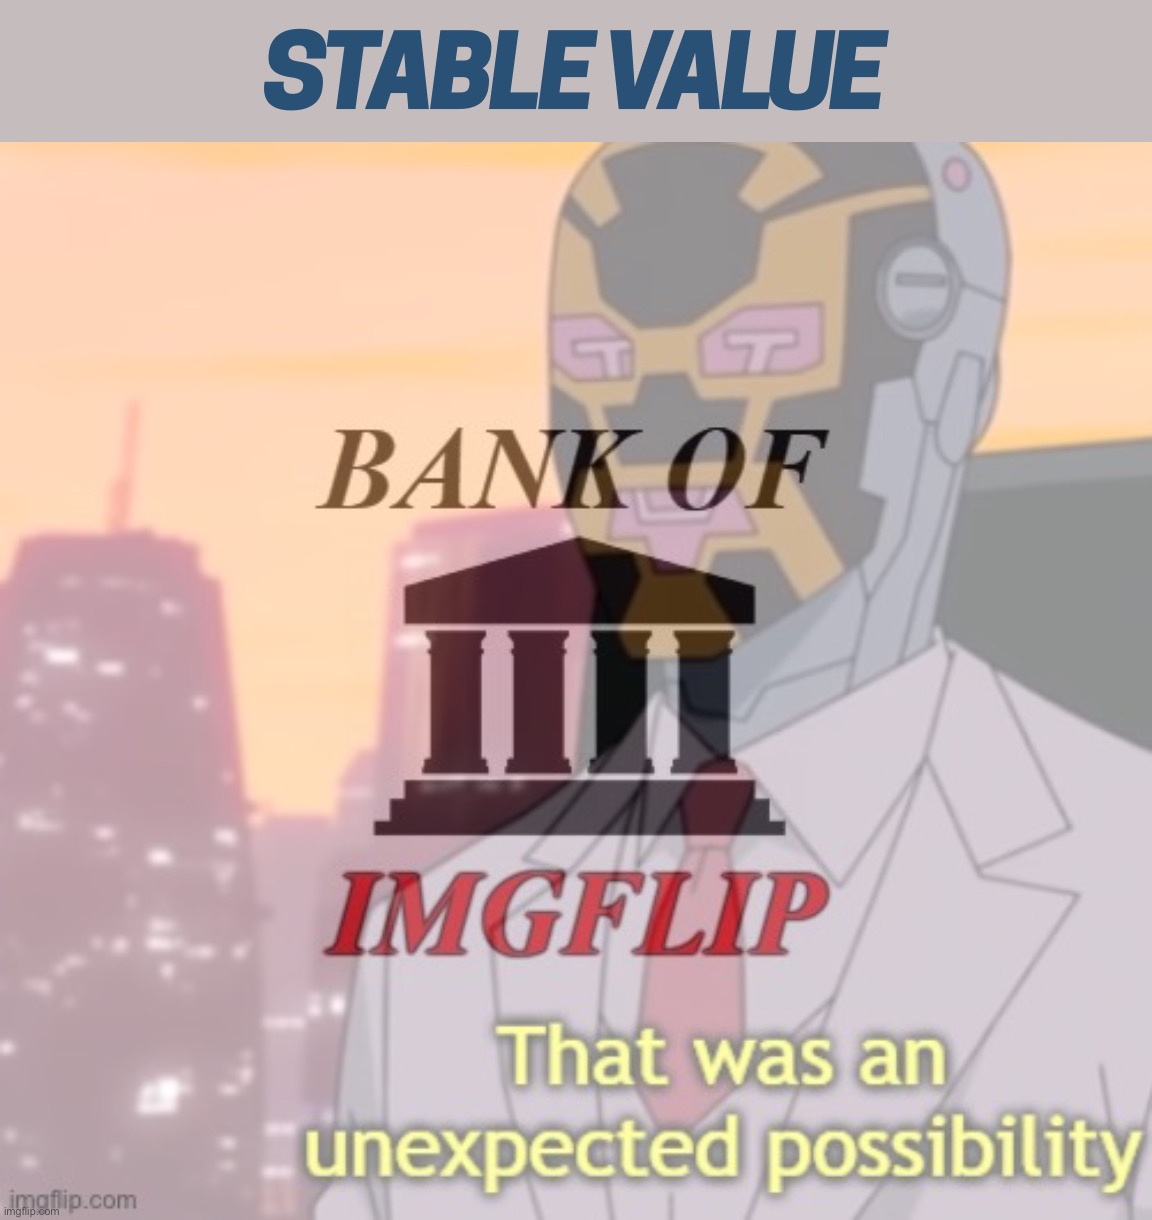 PROPOSE to establish Stable Value Bank of Imgflip (SVB). | image tagged in stable value,bank of imgflip that was an unexpected possibility,stable value bank,svb,imgflip_bank,imgflip bank | made w/ Imgflip meme maker